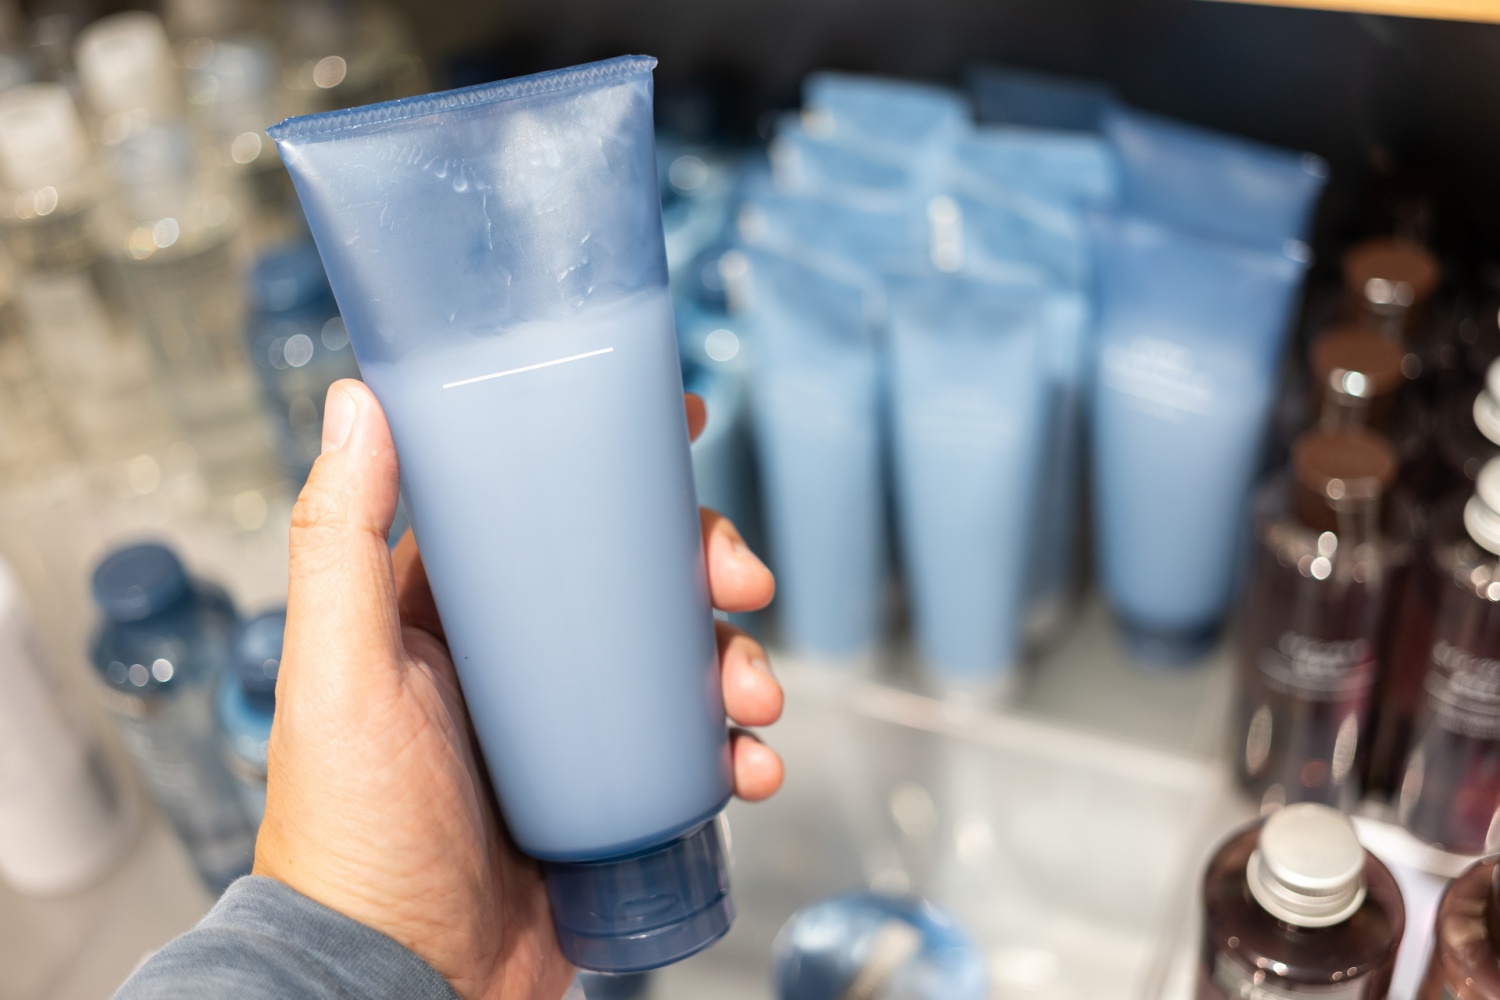 Lotions Formulated for Men's Skin